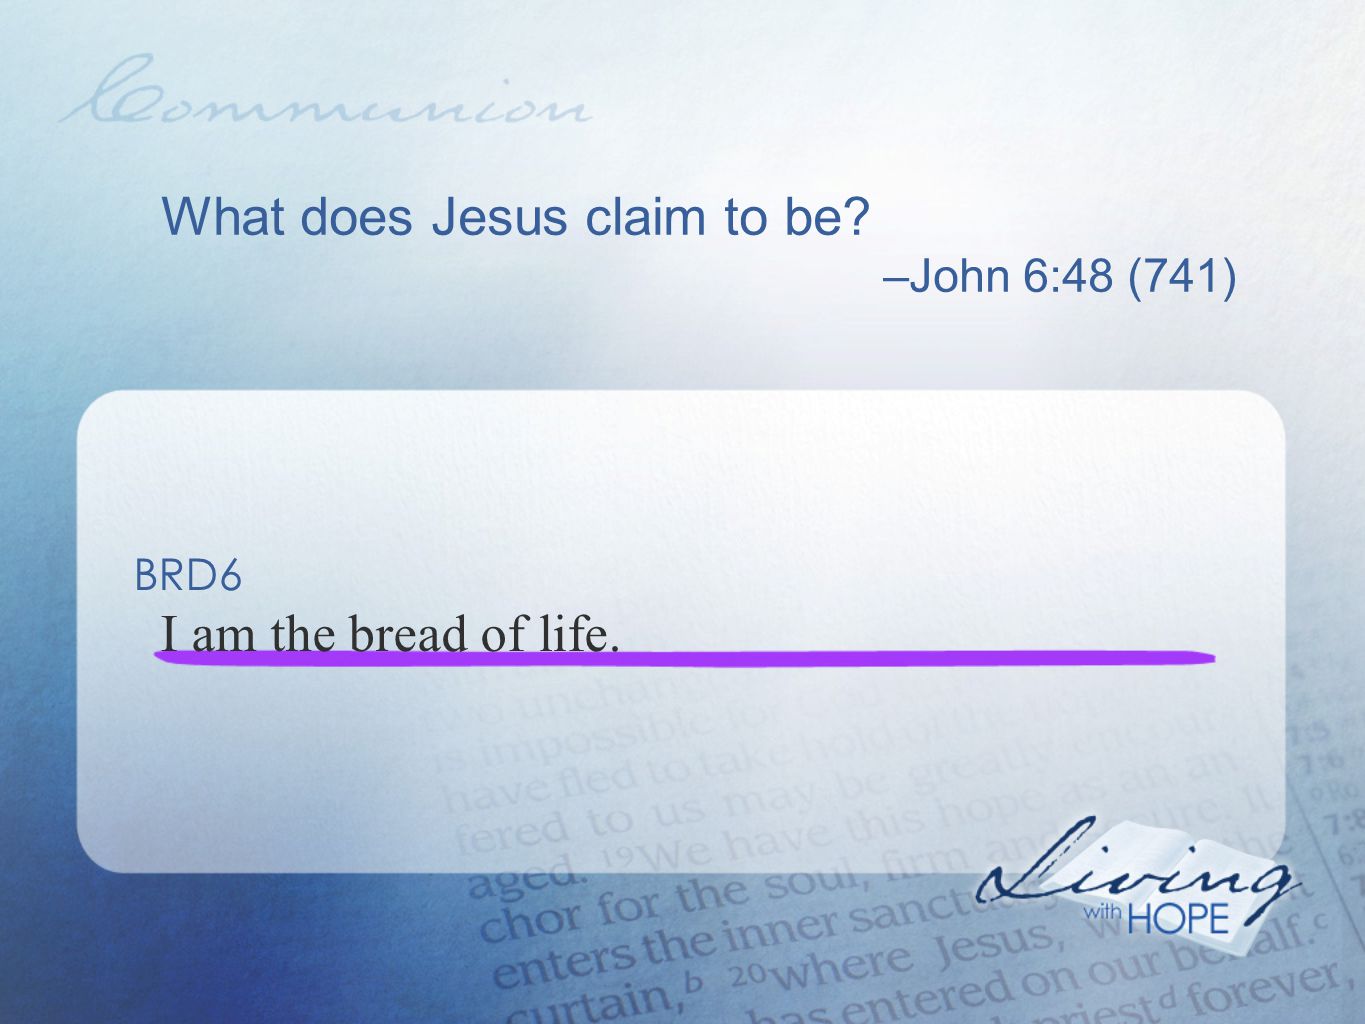 BRD6 I am the bread of life.